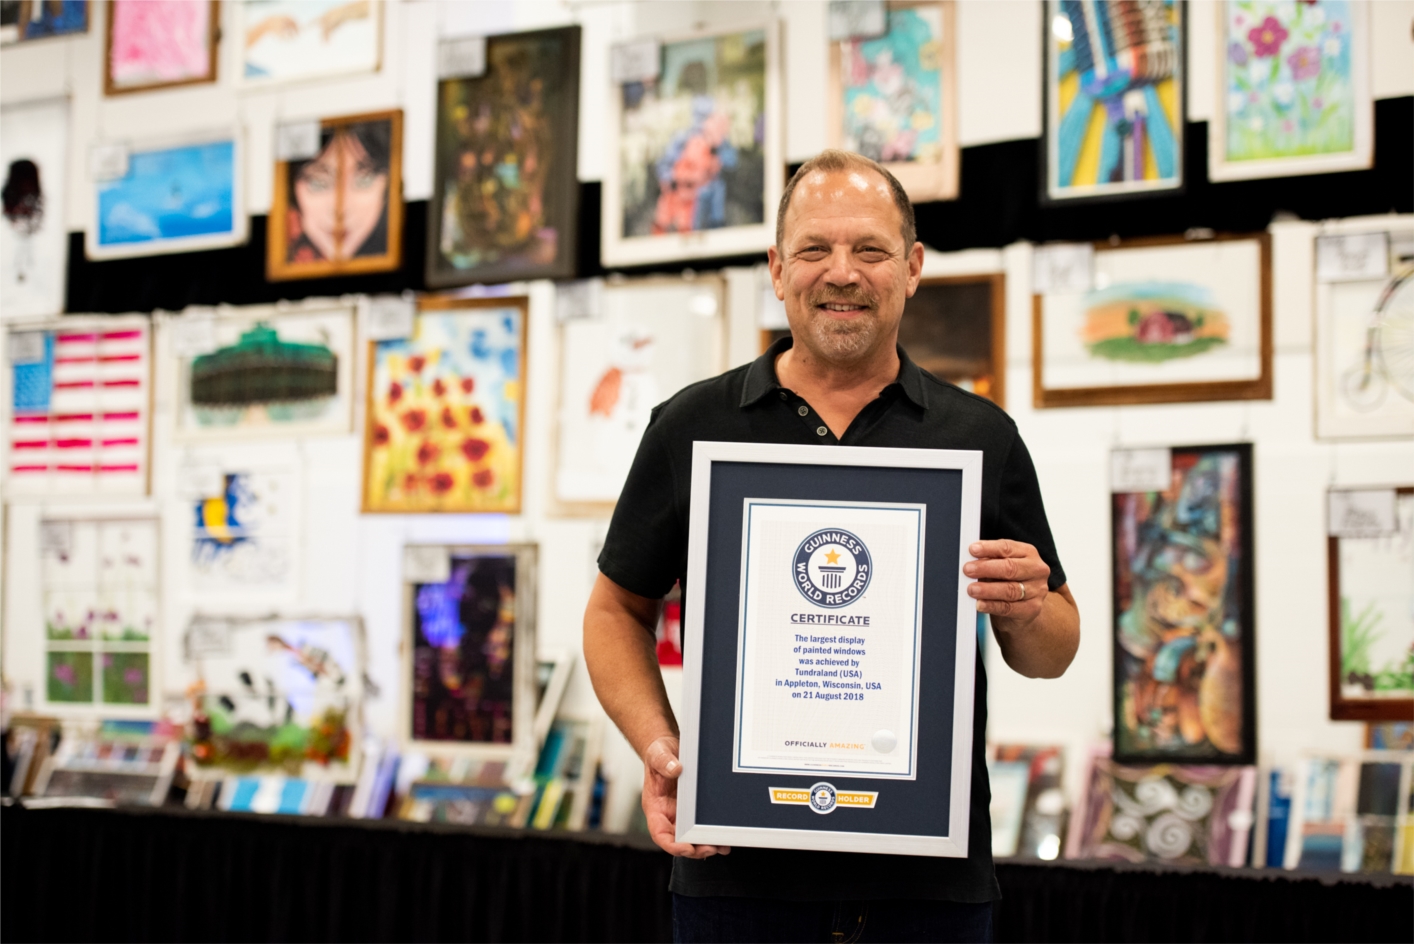 President of Tundraland, Brian Gottlieb takes a photo with the company's Guinness World Record Title for the Largest Display of Painted Windows. 